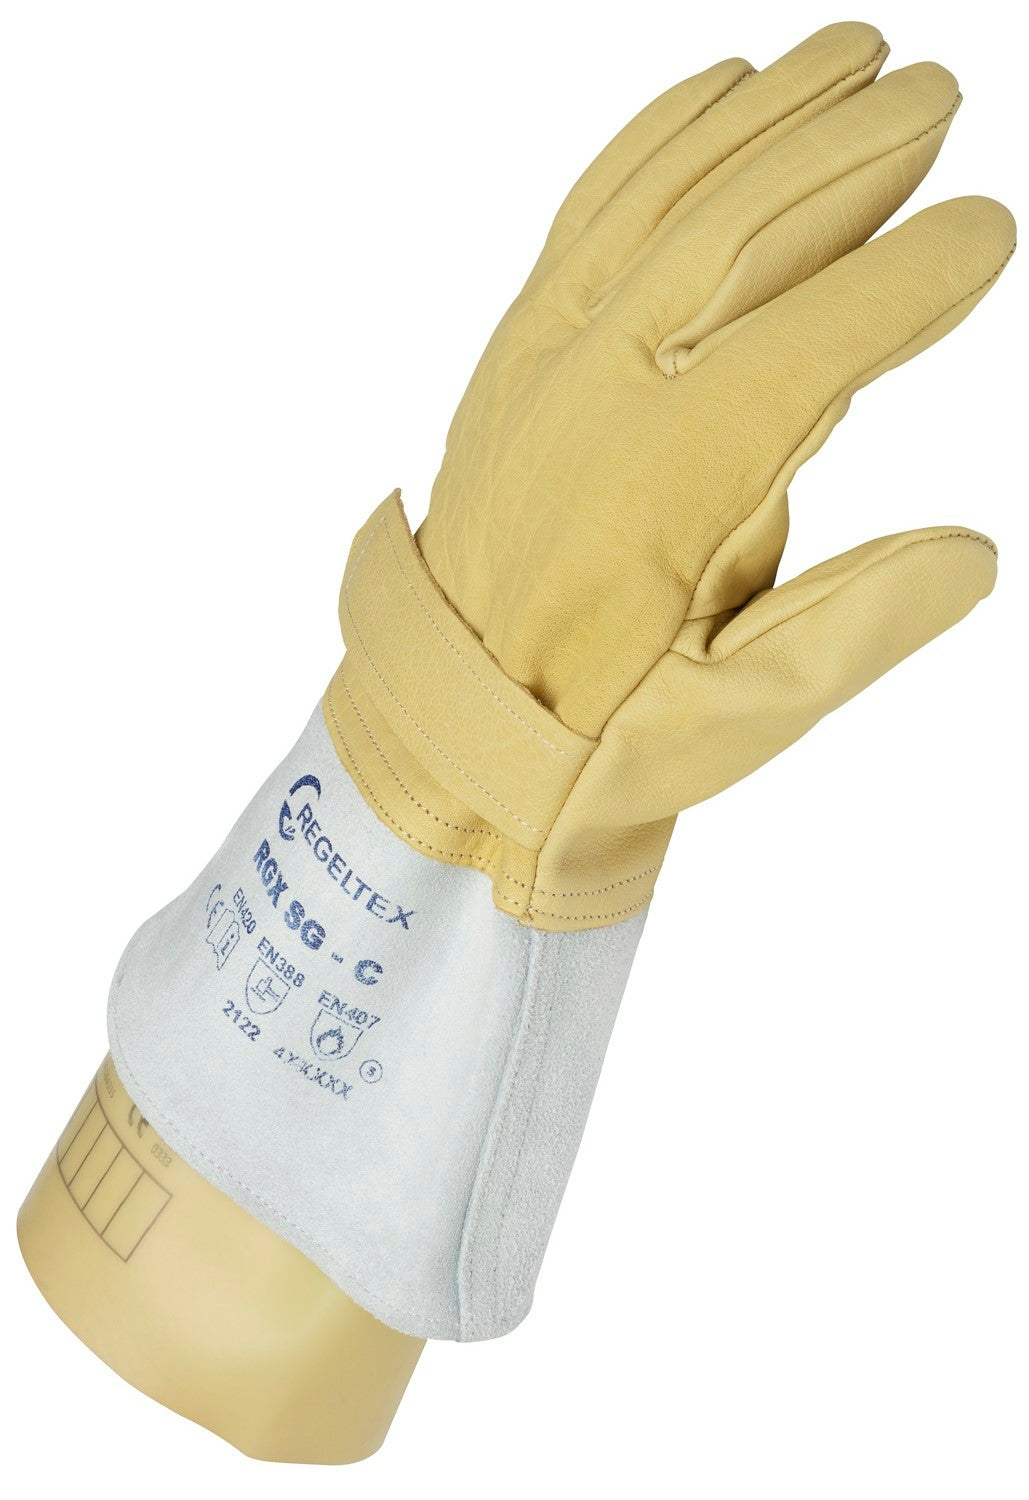 Sibille leather over gloves